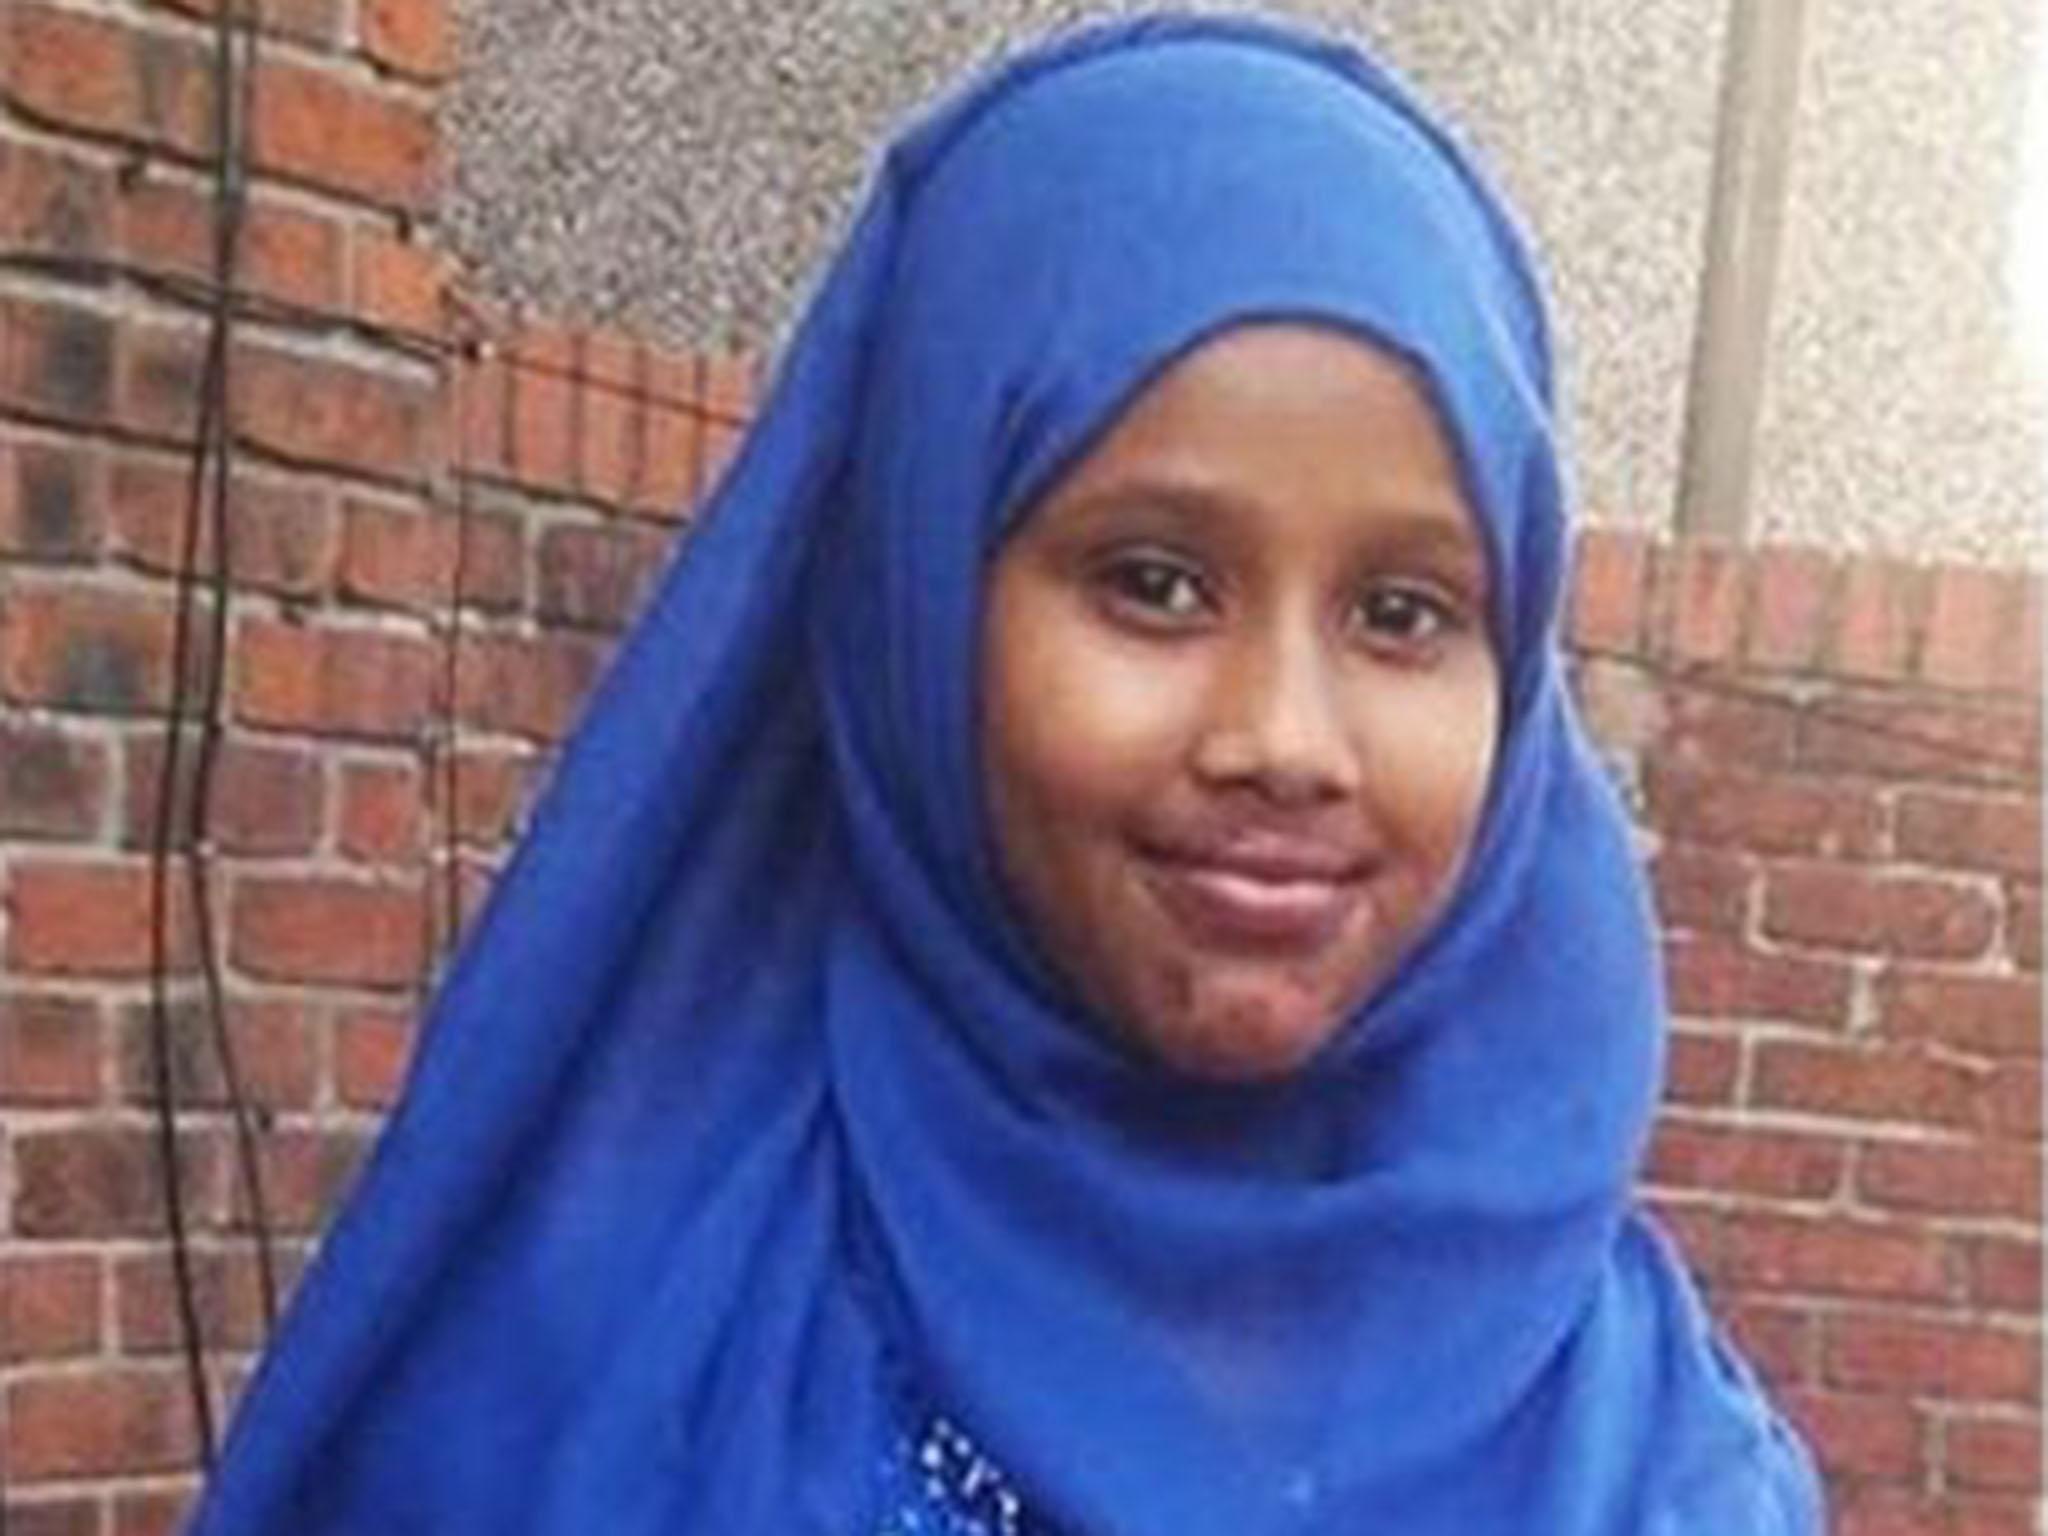 It’s understood that Abdi may have been with two other children when she tragically drowned, according to Greater Manchester Fire and Rescue Service